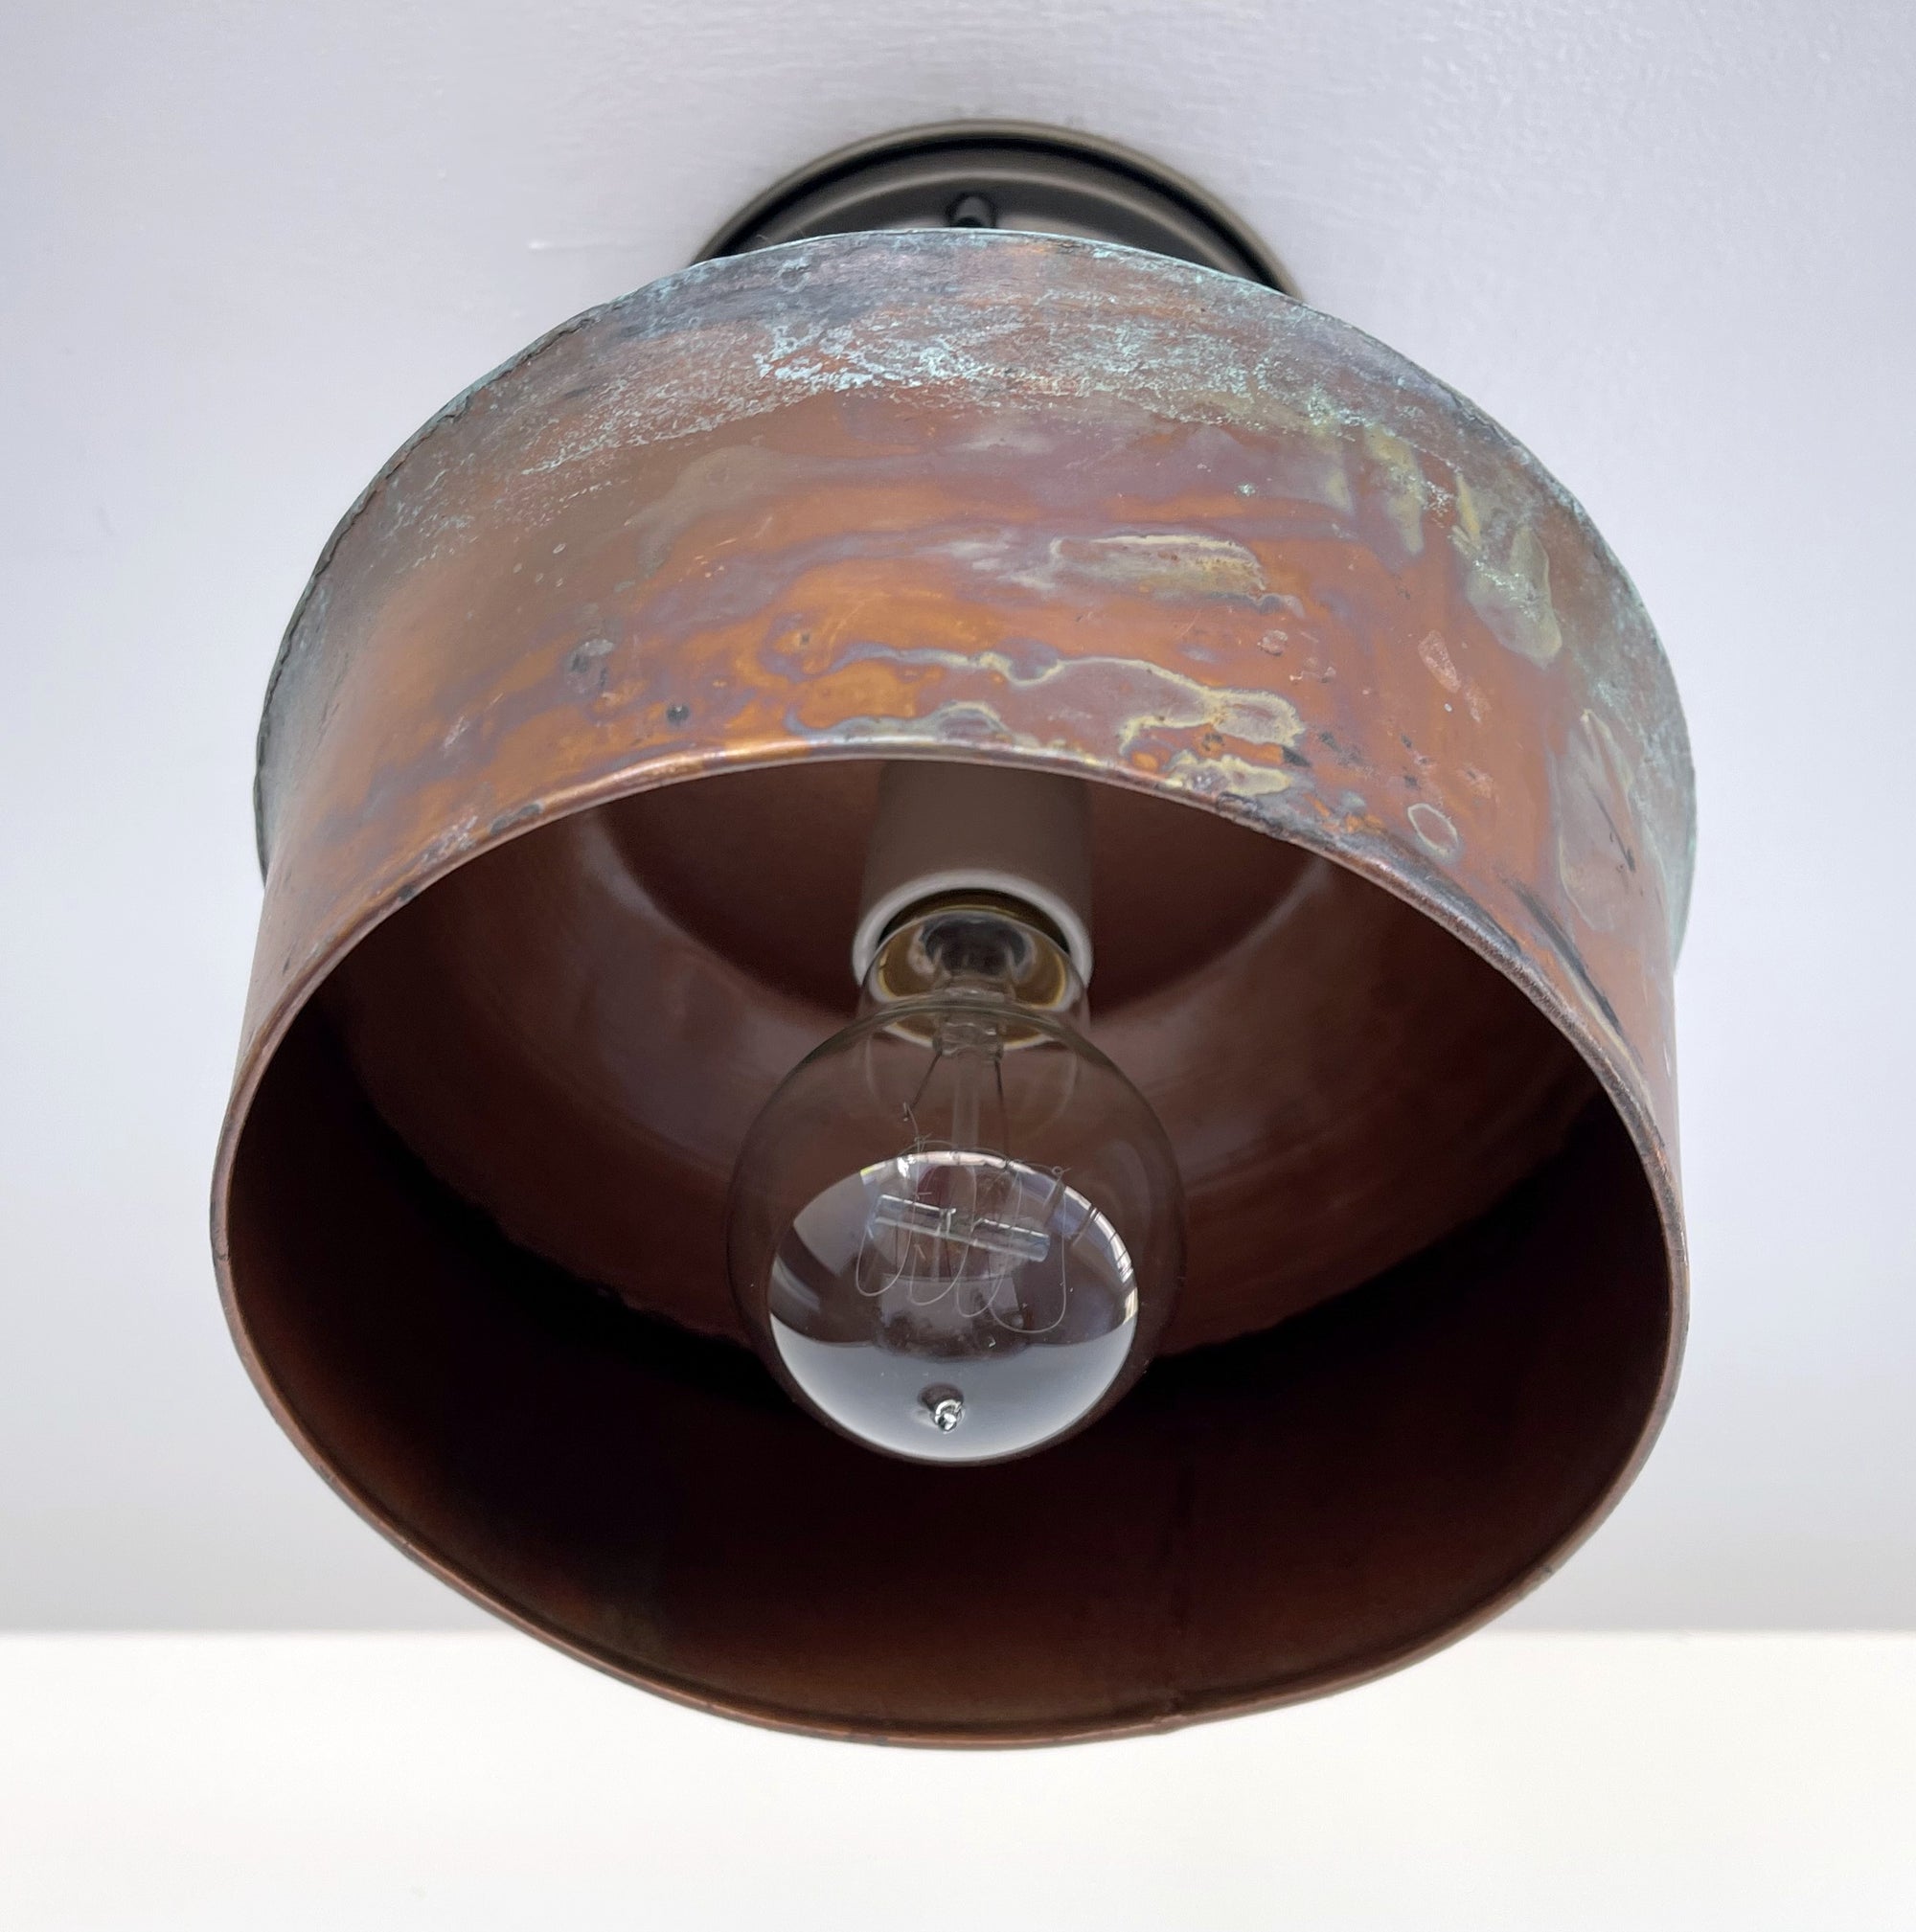 Handcrafted Copper Farmhouse Ceiling Light